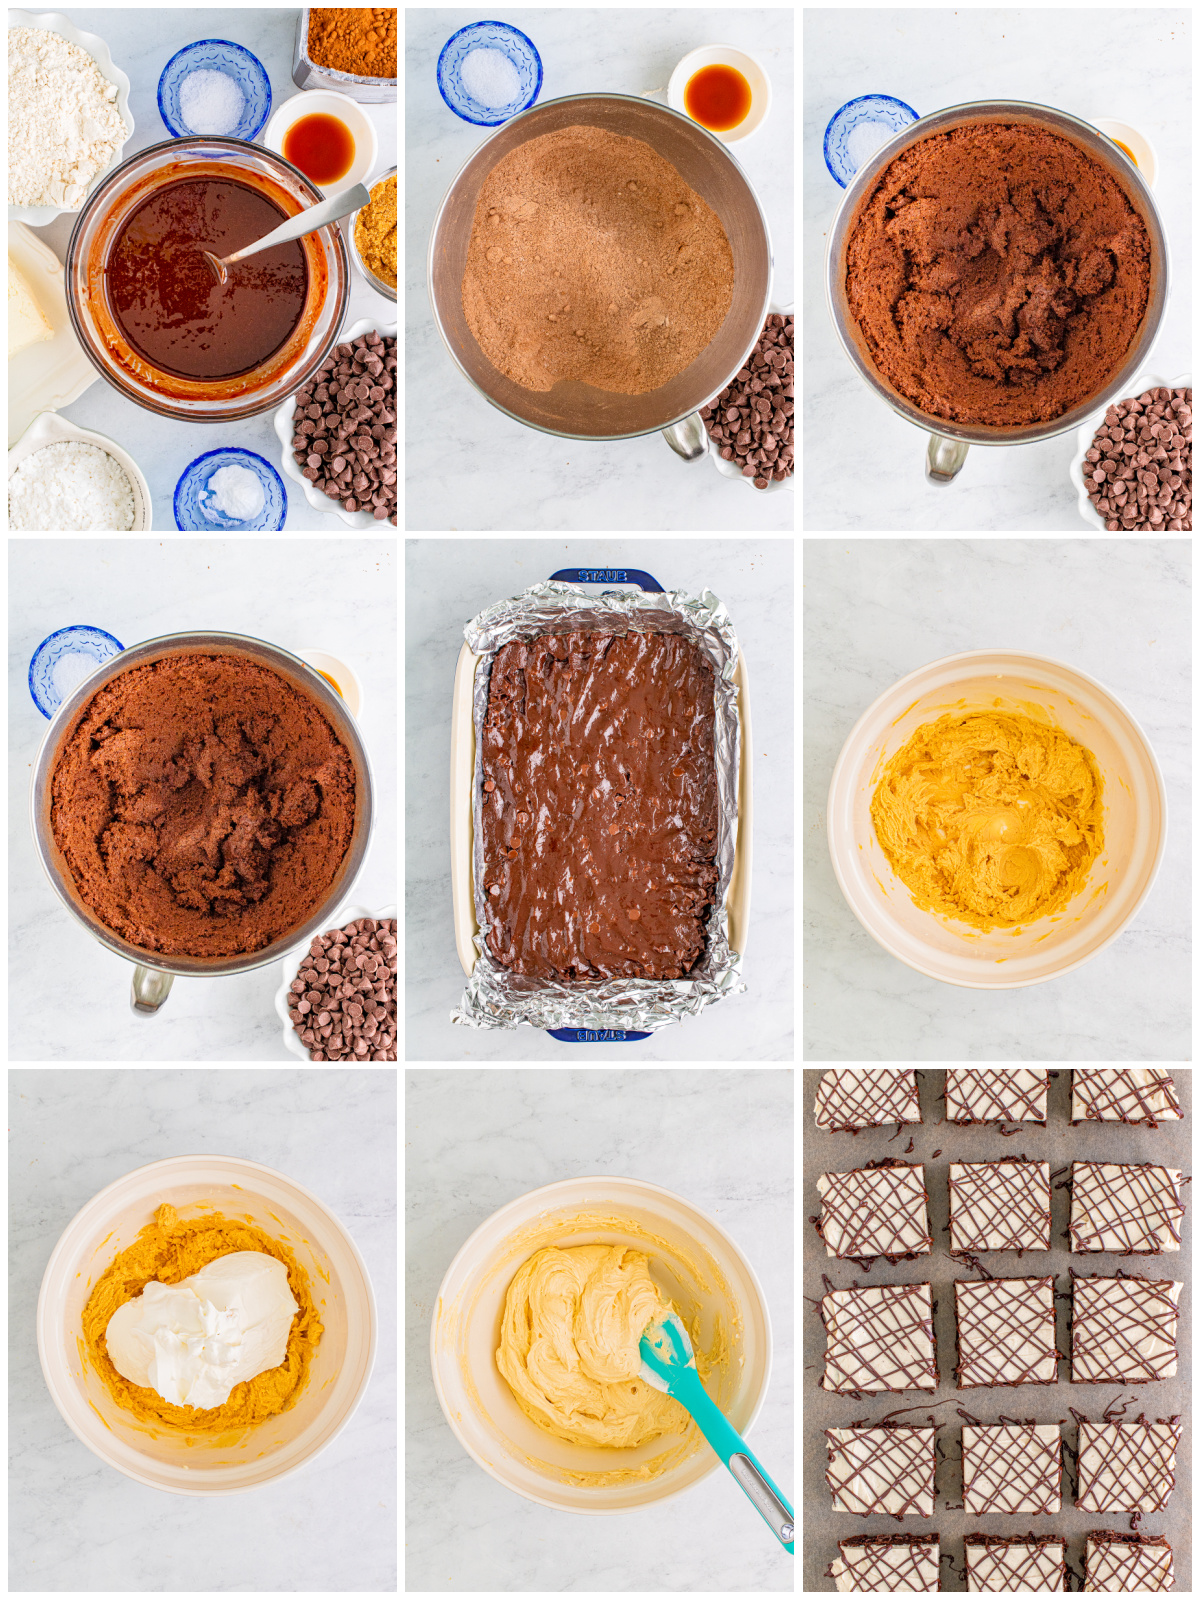 Step by step photos on how to make Peanut Butter Brownies.